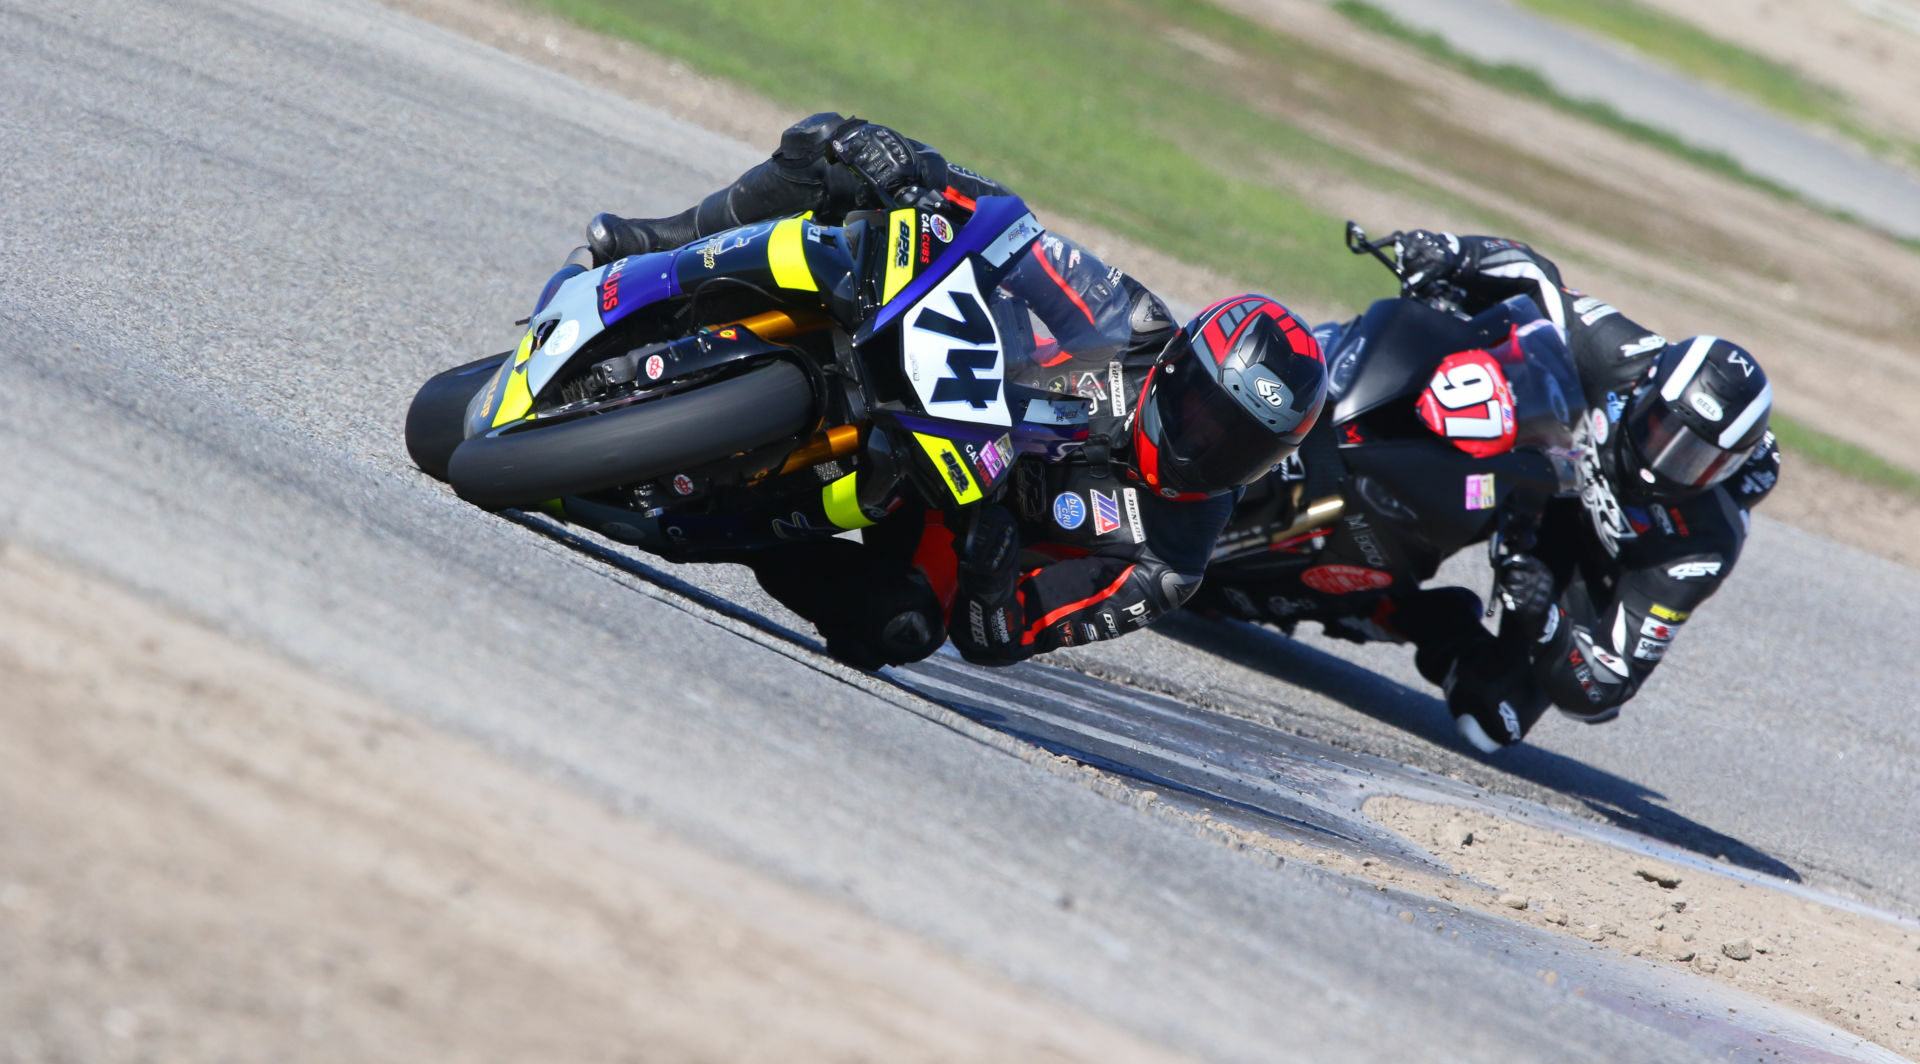 Bryce Prince (74) leads Ezra Beaubier (97) during the CRA Riderzlaw Gold Cup race at Buttonwillow. Photo by Caliphotography.com